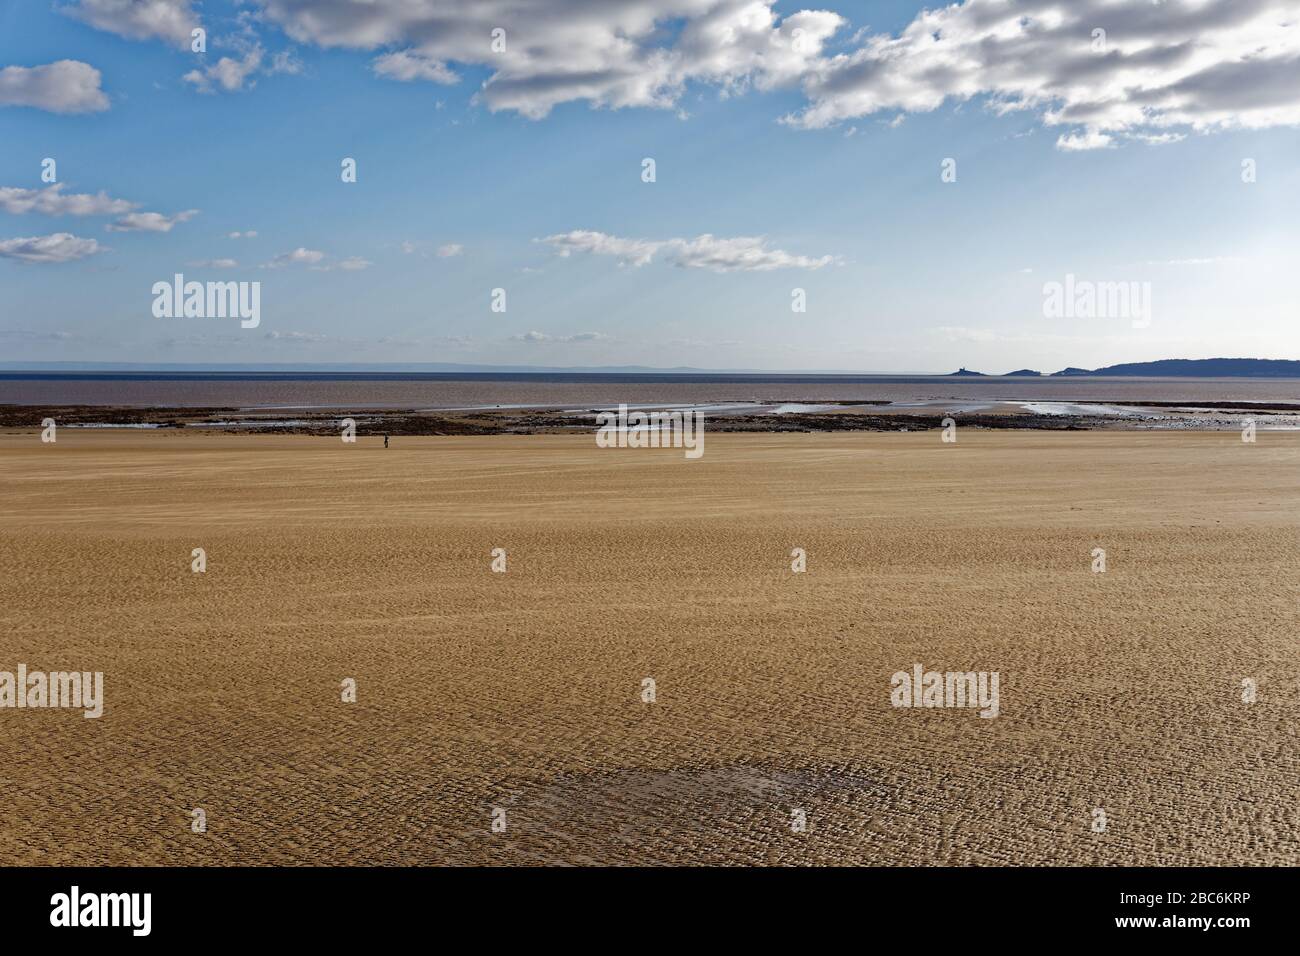 Pictured: The beach, which is usually busy with people on Sunday afternoon when it is sunny, is now deserted in Swansea, Wales, UK. Sunday 29 March 20 Stock Photo